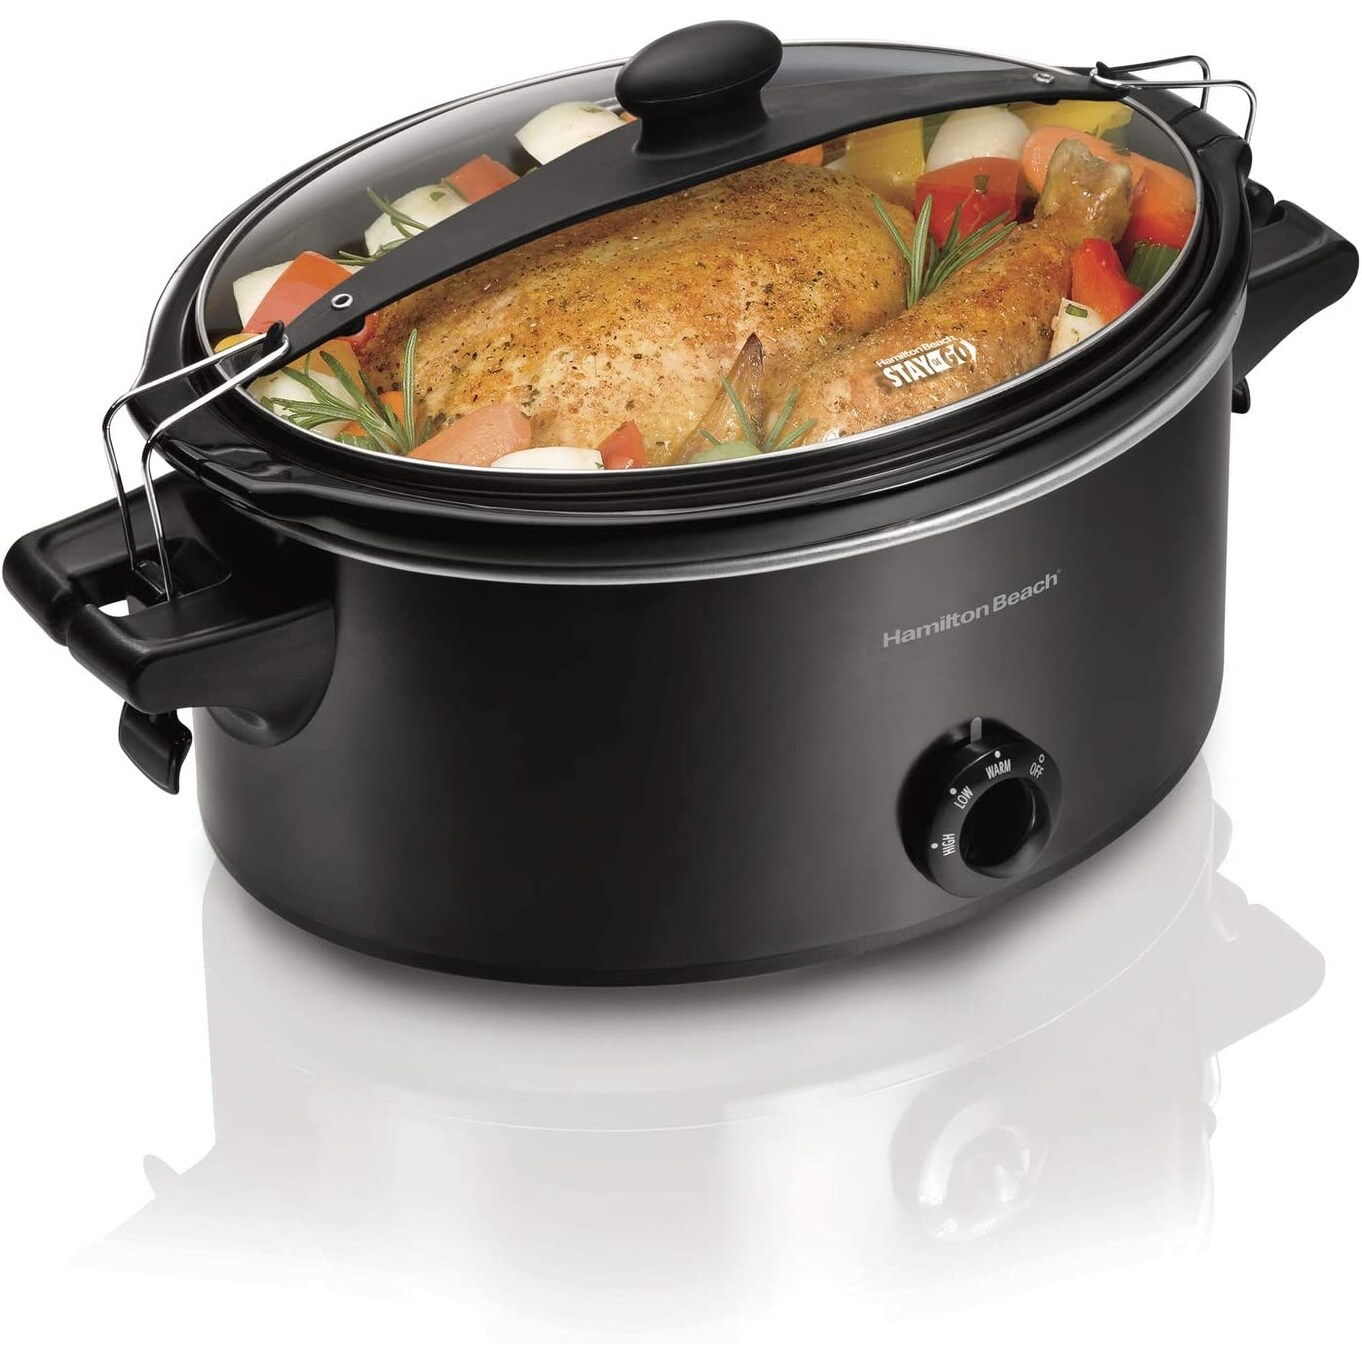 https://ak1.ostkcdn.com/images/products/is/images/direct/0df9913d5907bd32bace945227a752853e79944a/Slow-Cooker%2C-Extra-Large-10-Quart%2C-Stay-or-Go-Portable-With-Lid-Lock%2C-Dishwasher-Safe-Crock.jpg